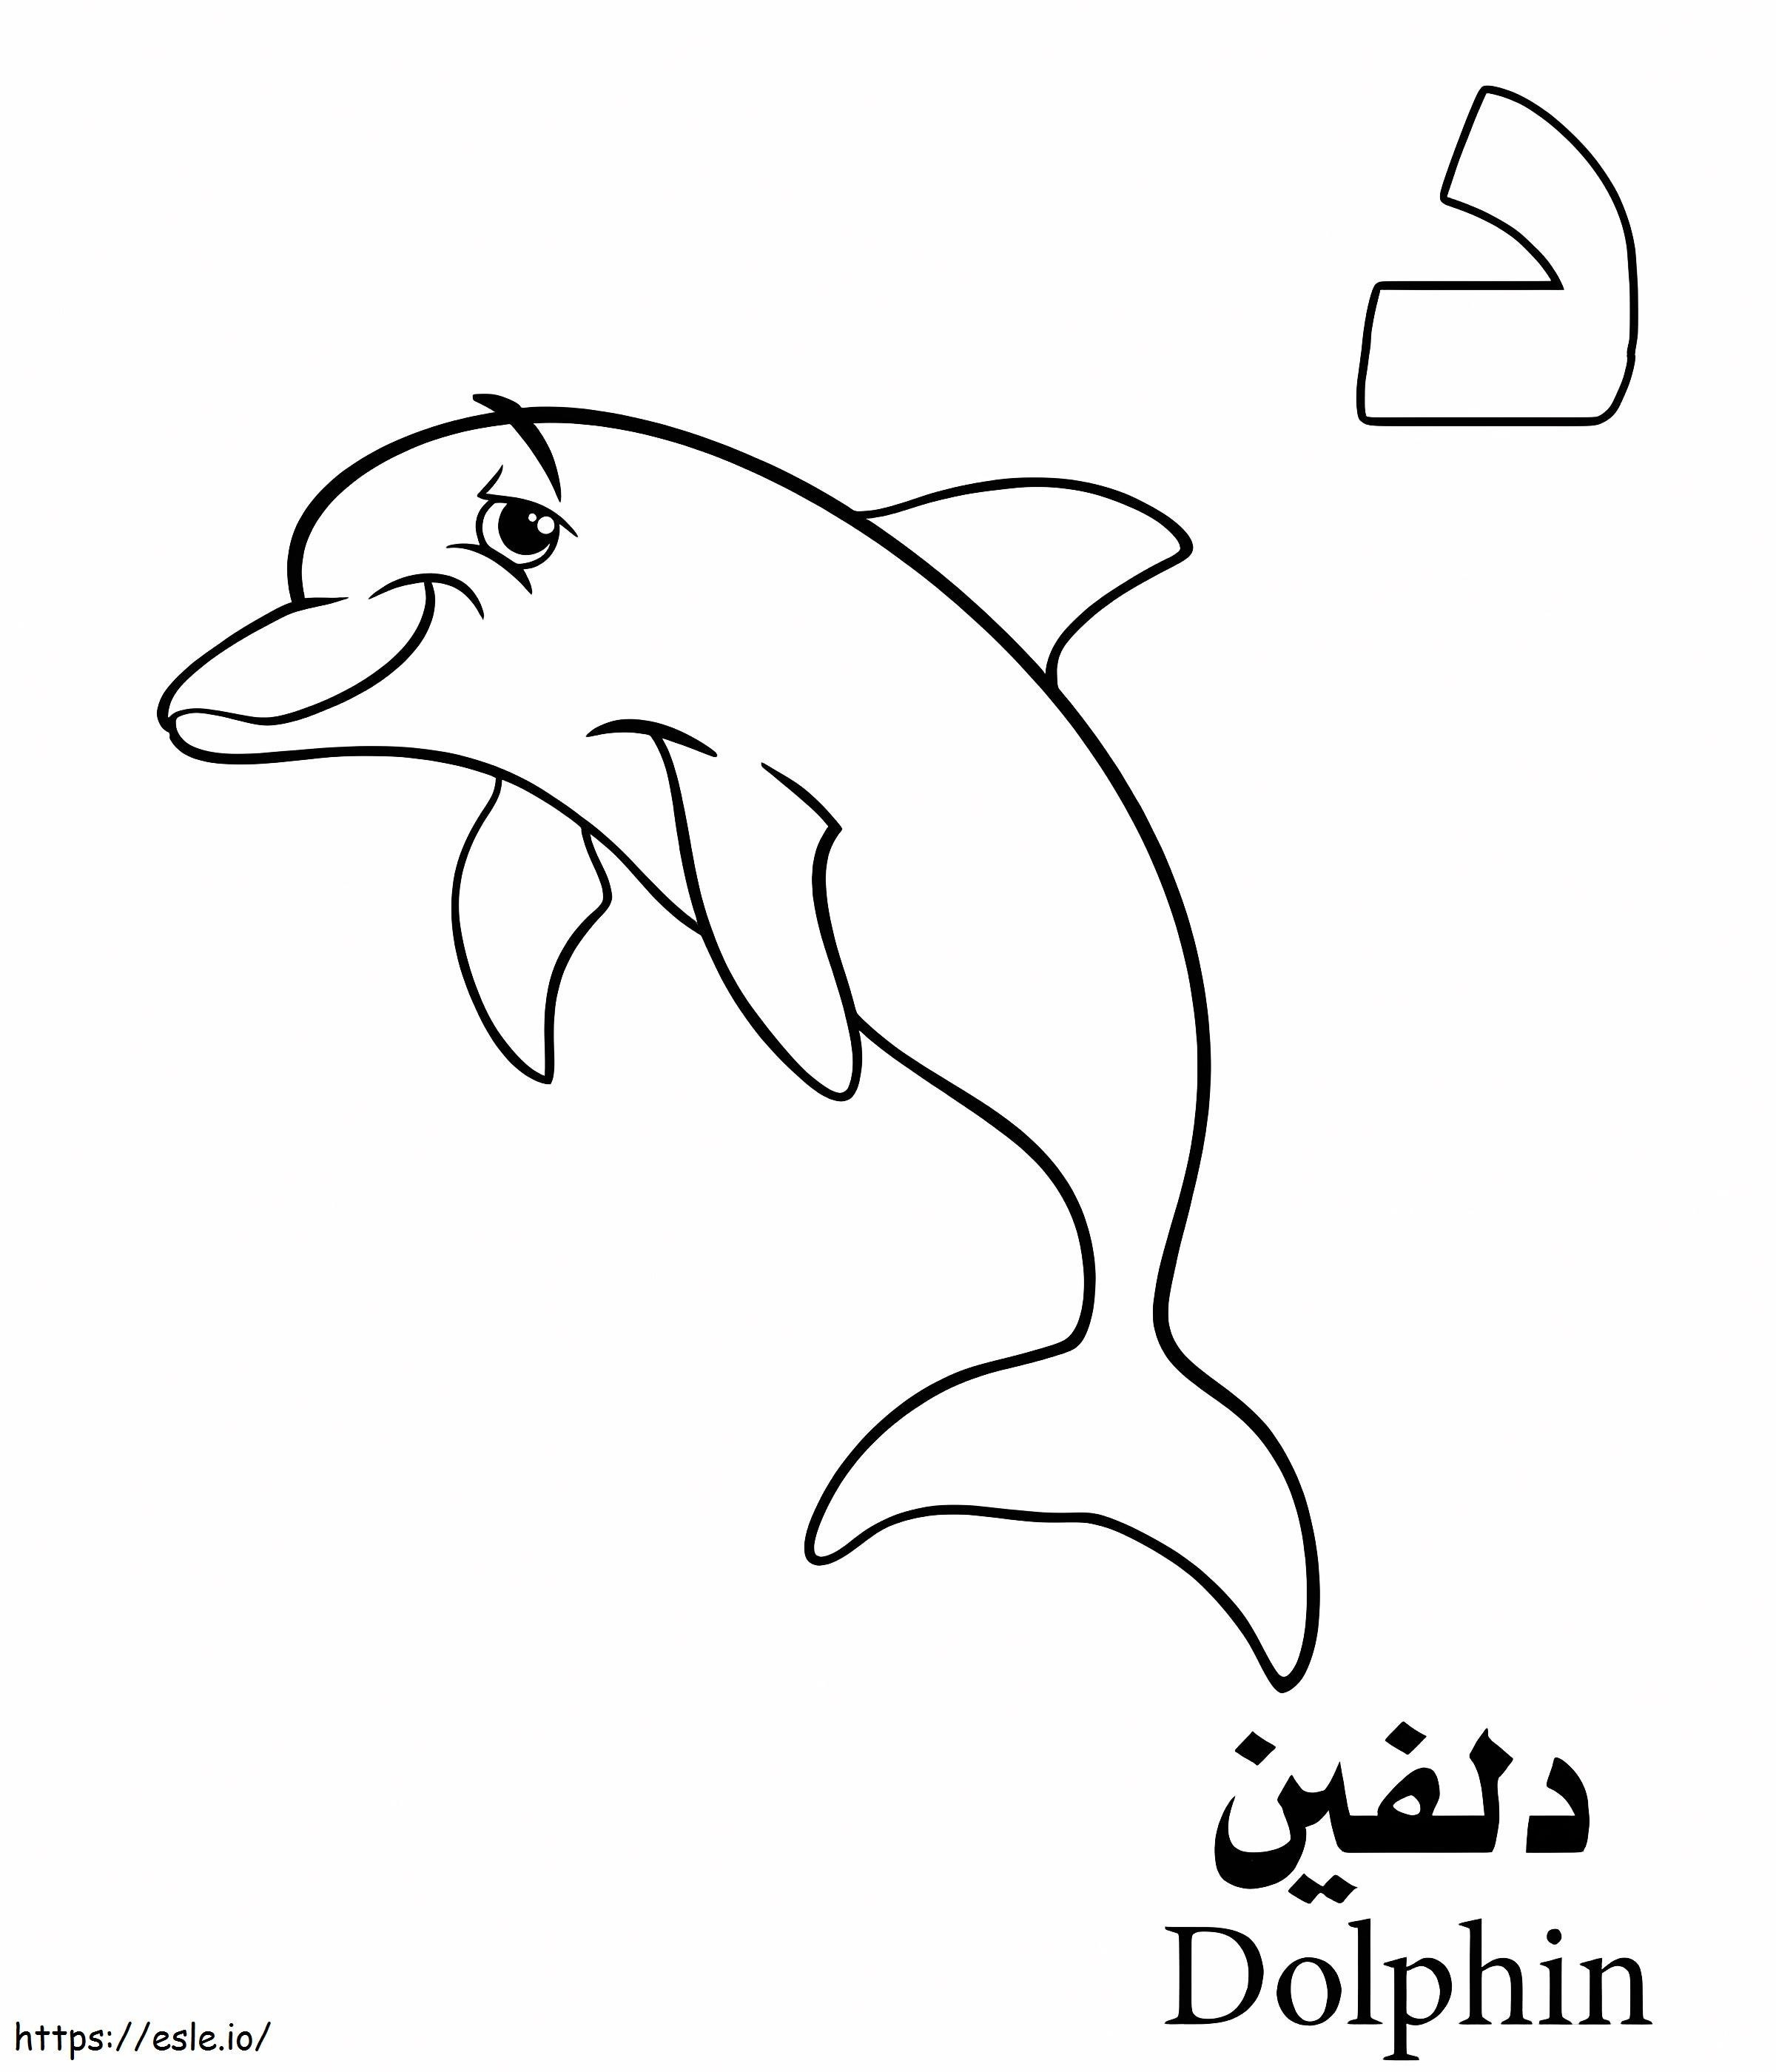 Dolphin Arabic Alphabet coloring page